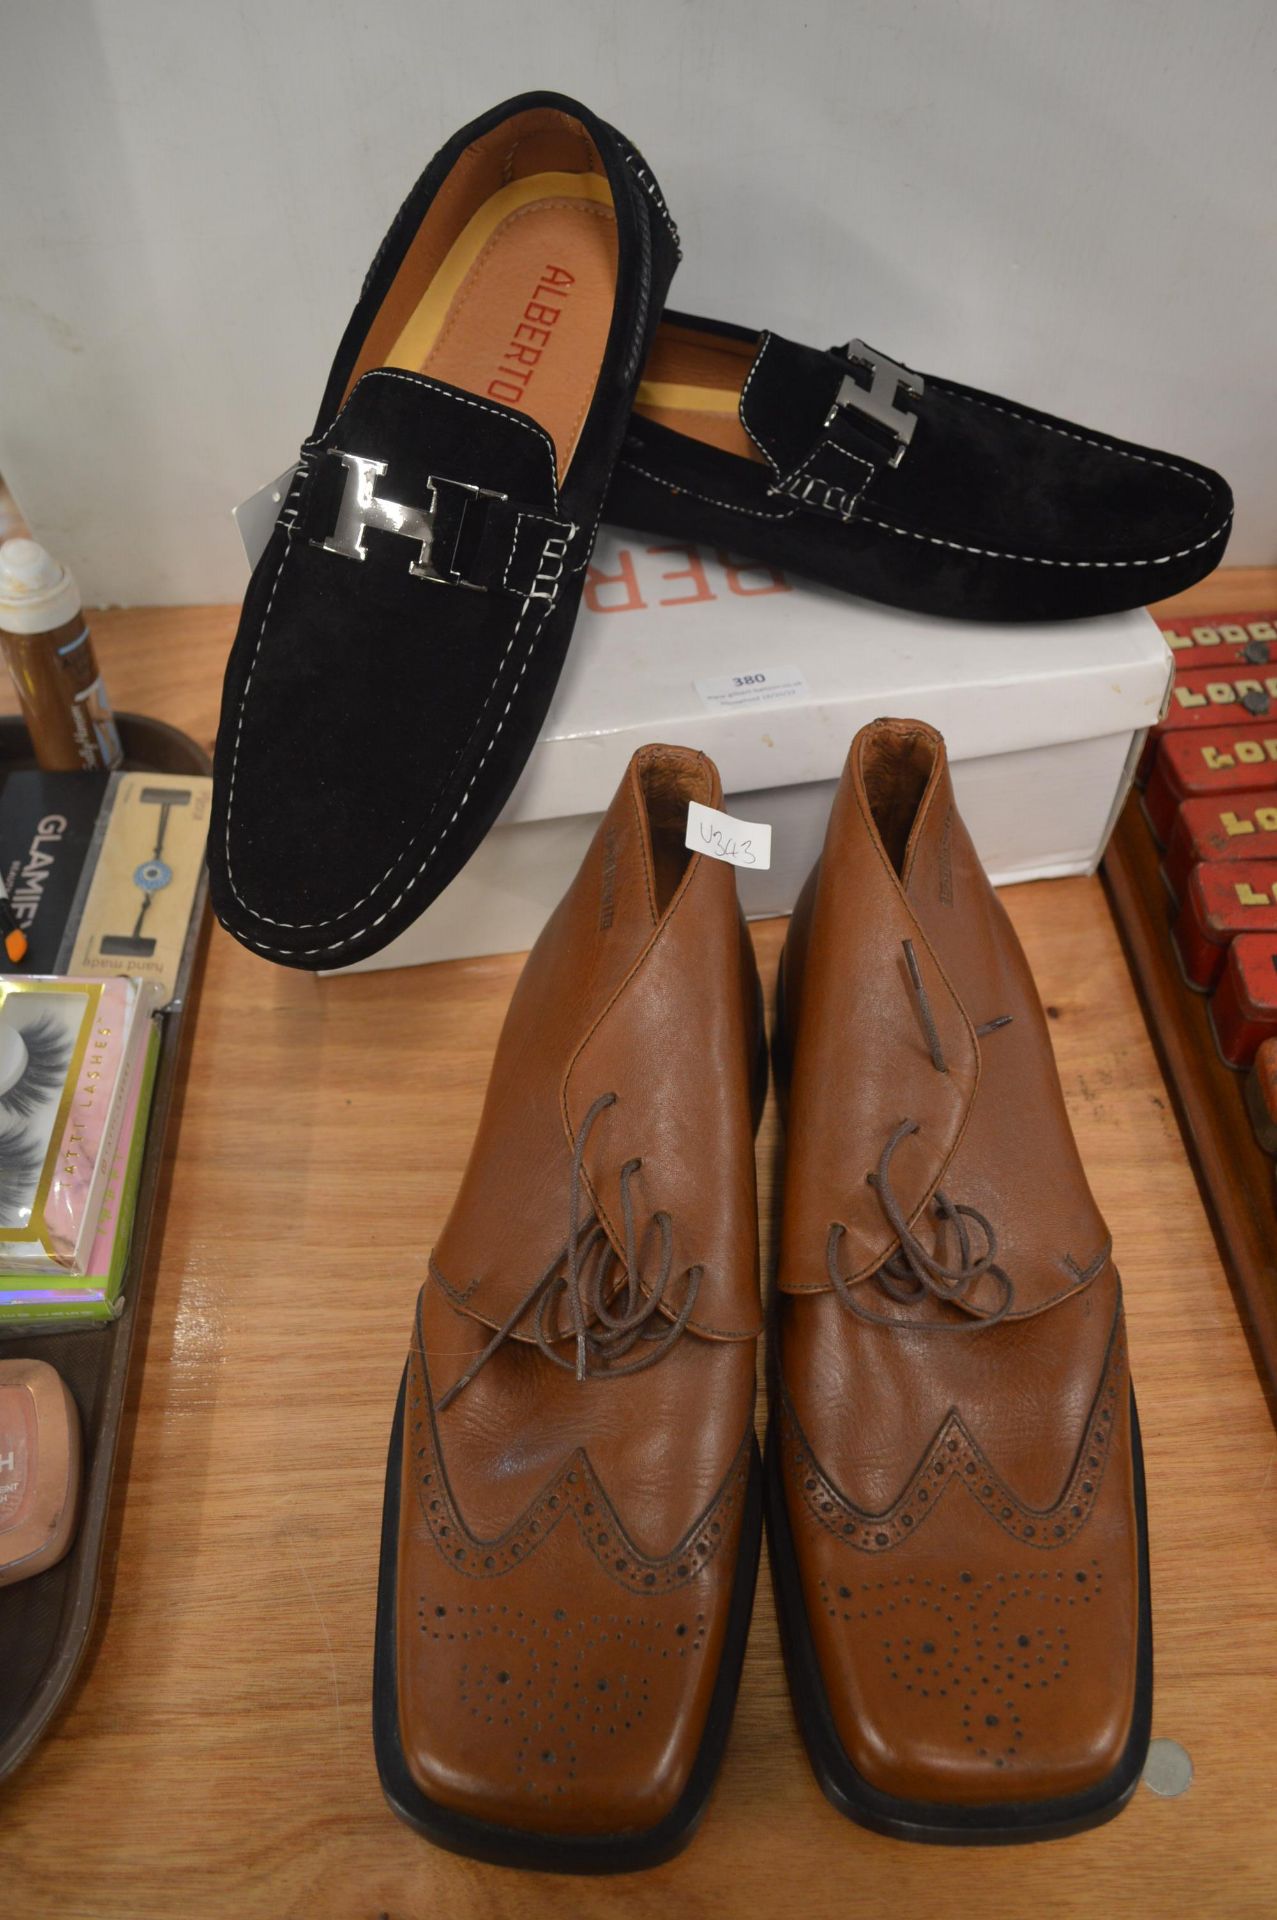 Two Pairs of Gent's Shoes by Alberto and Lambretta